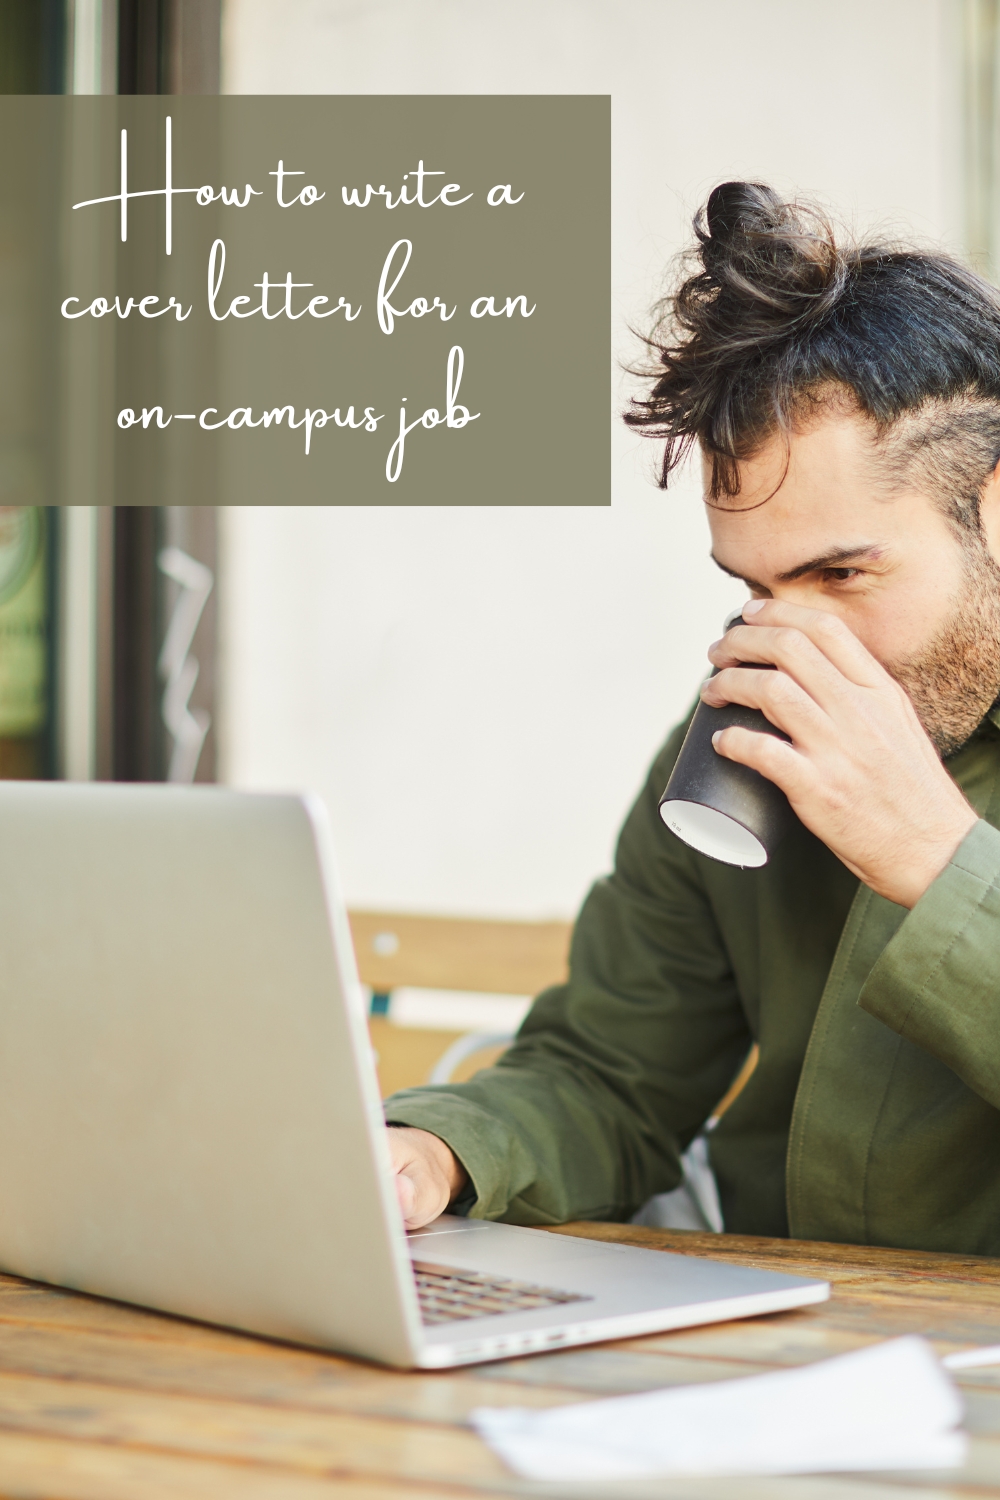 How to Write a Cover Letter for an On-Campus Job (1)